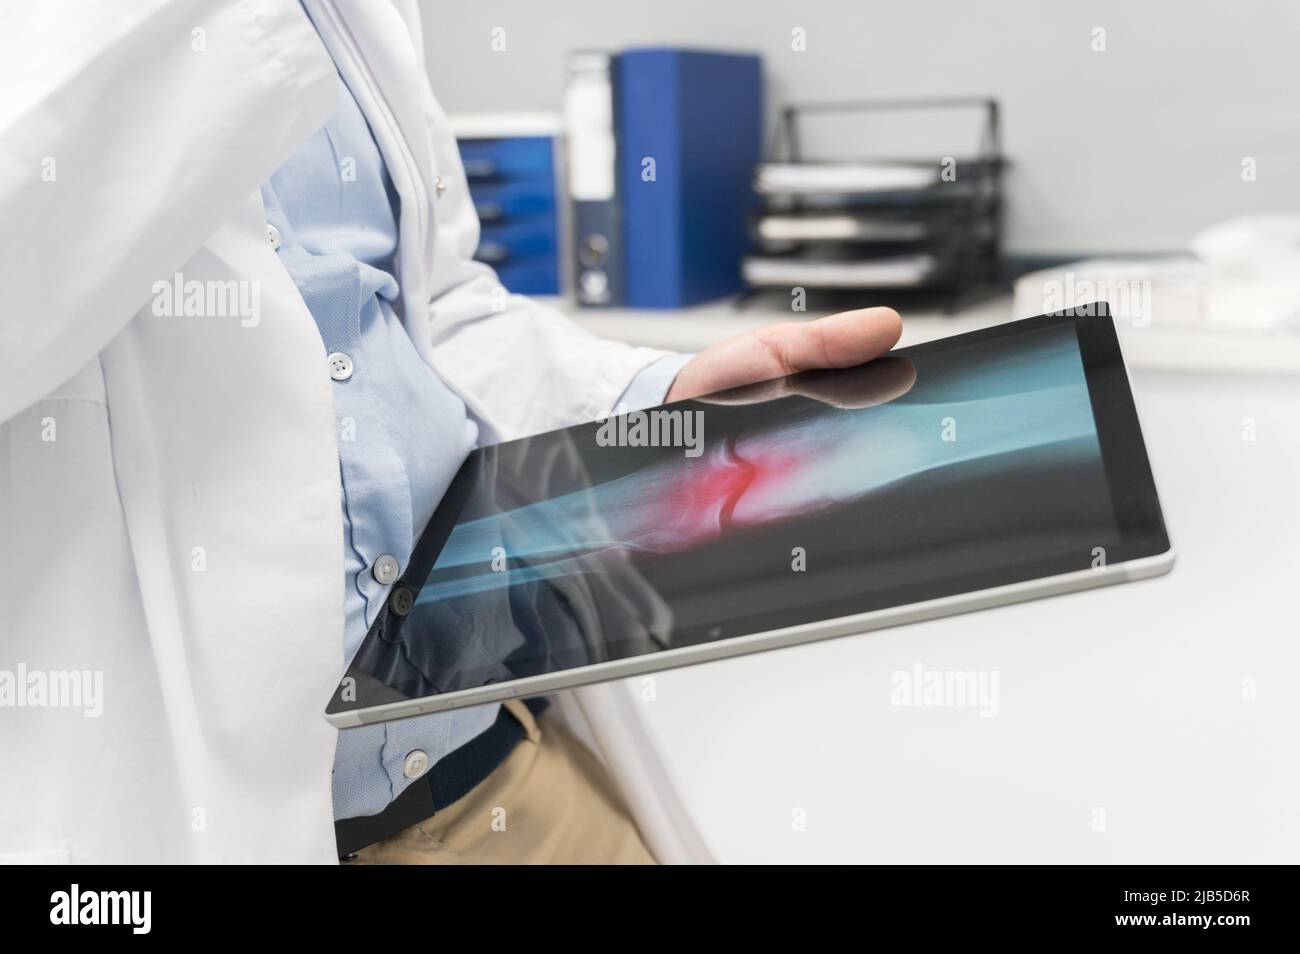 Unrecognizable Doctor is checking x-ray image at computer tablet, close up. Doctor at work in a hospital. Medicine and healthcare concept. High Stock Photo